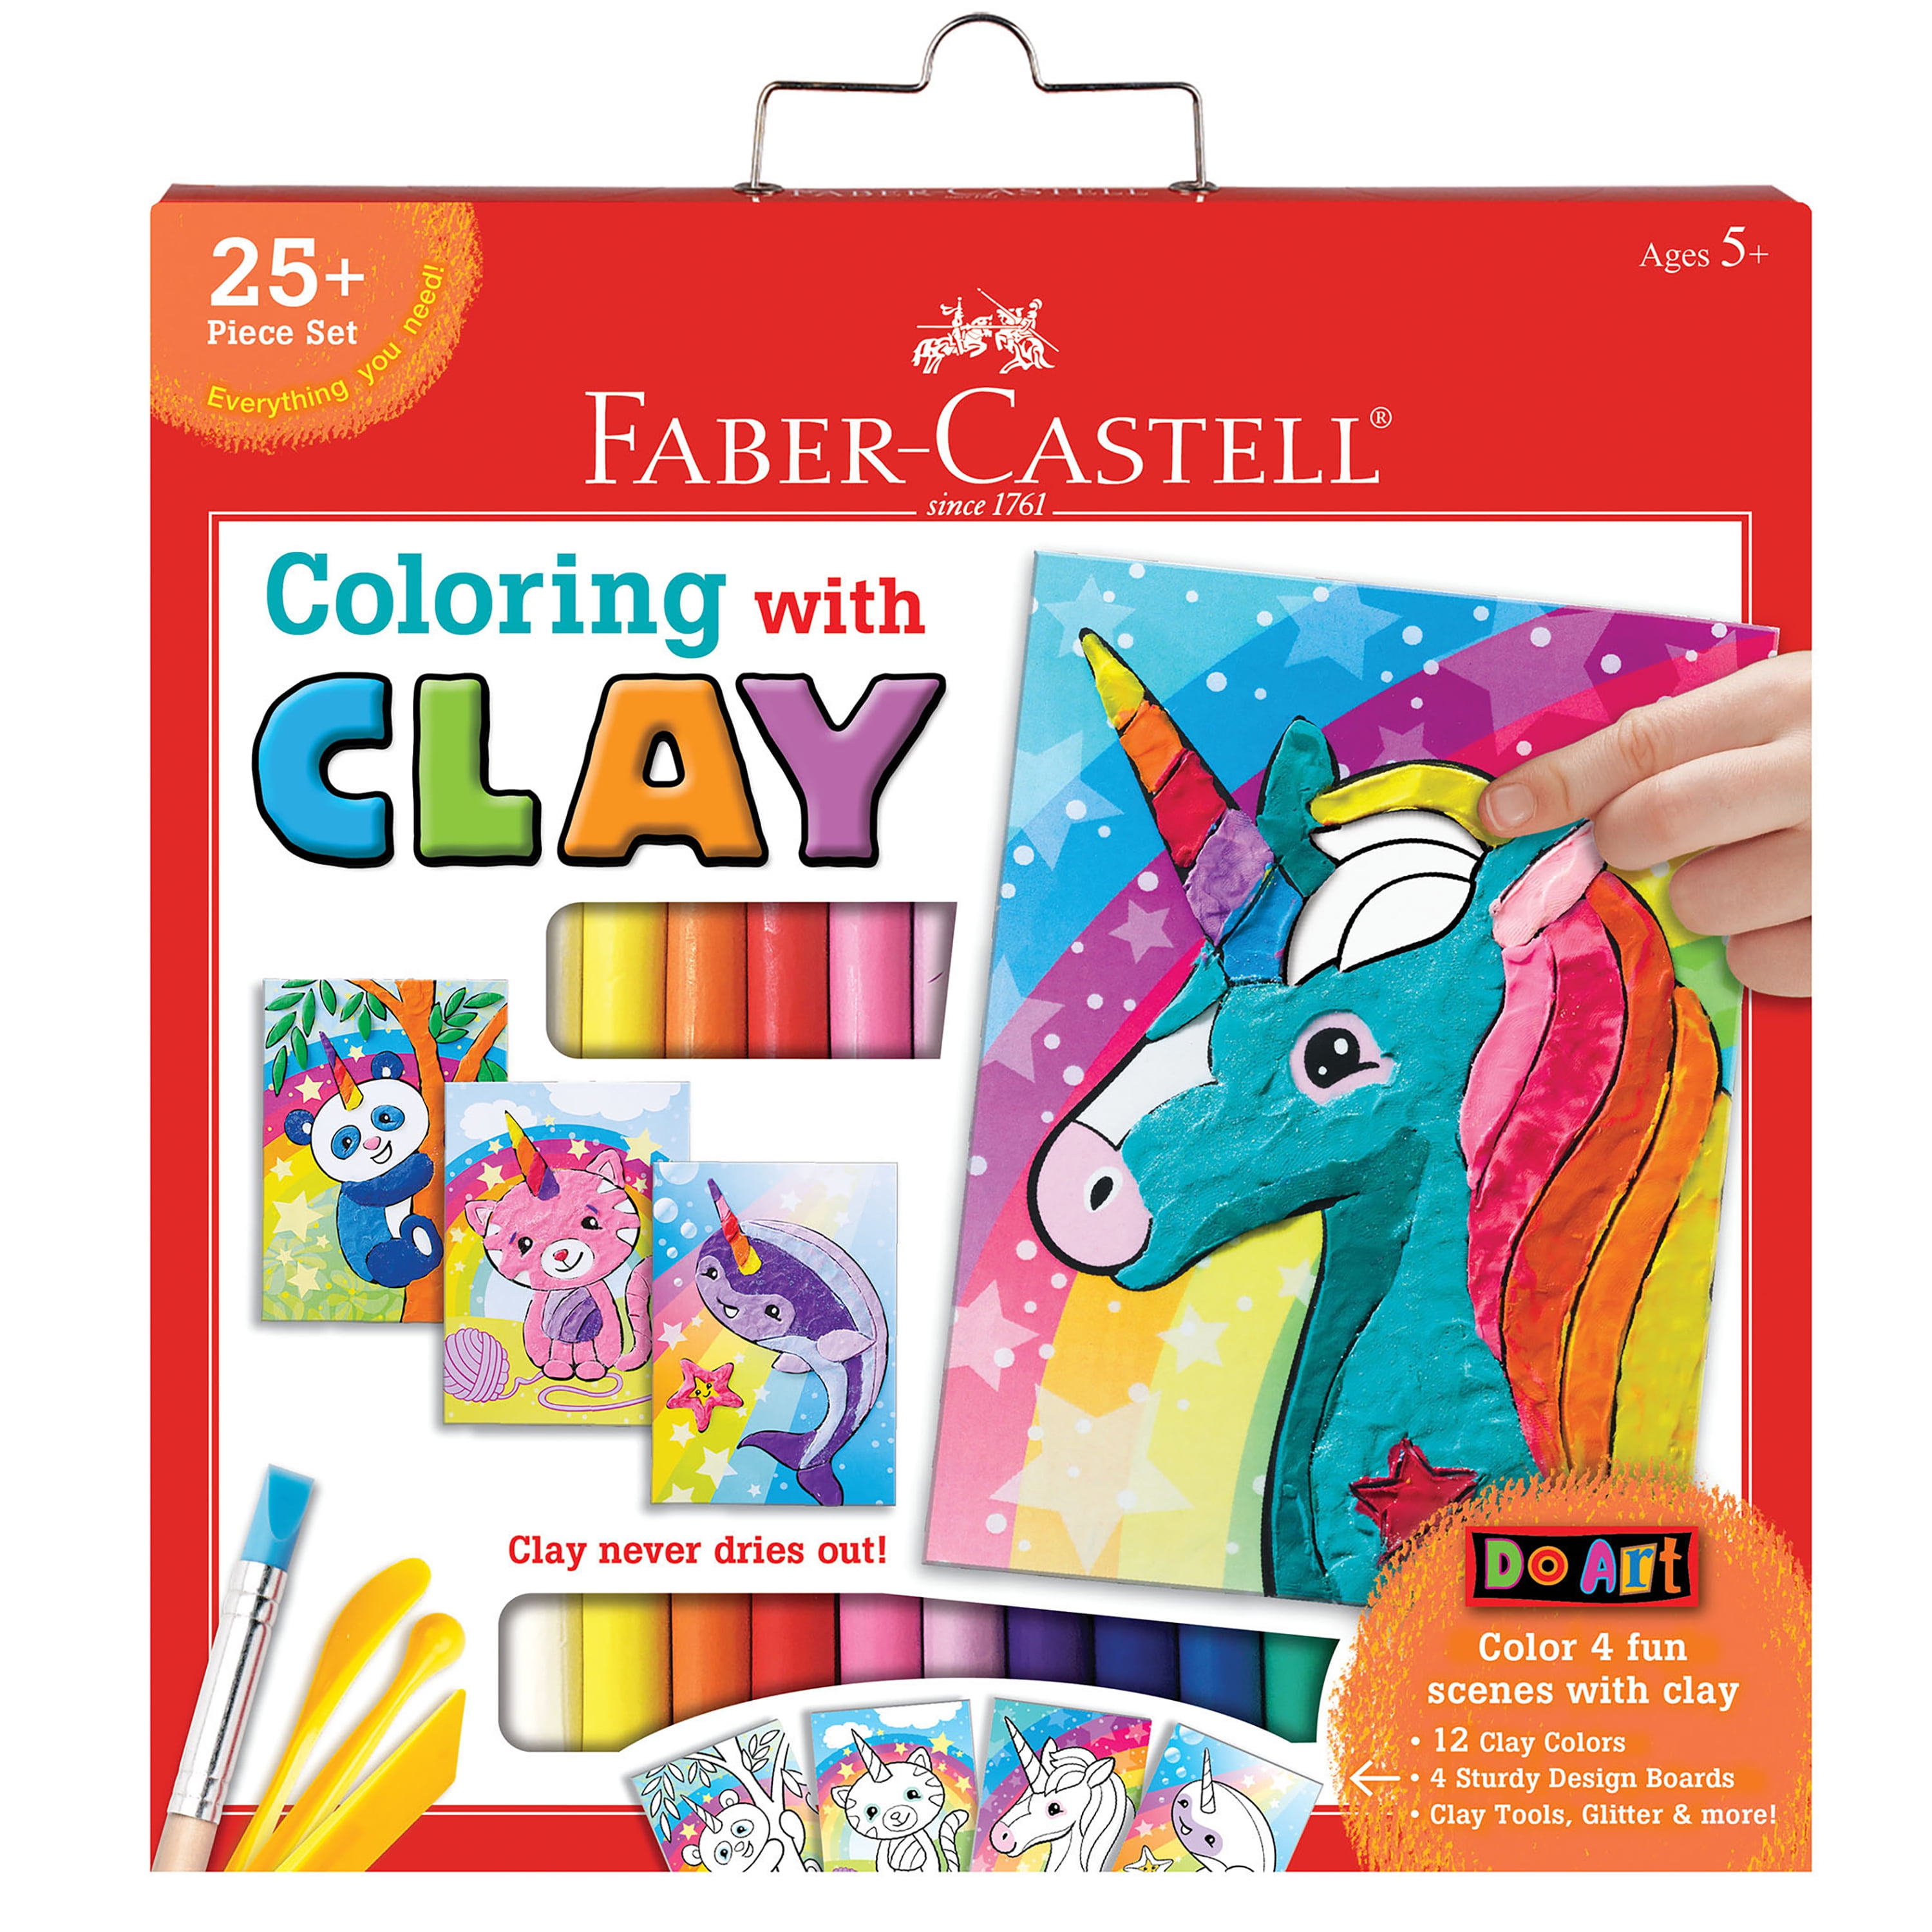 Unicorn Activity Set for Girls Ages 4-8, FunKidz Coloring Art Kits for Kids  4-6 Unicorn Drawing Kit for Preschool